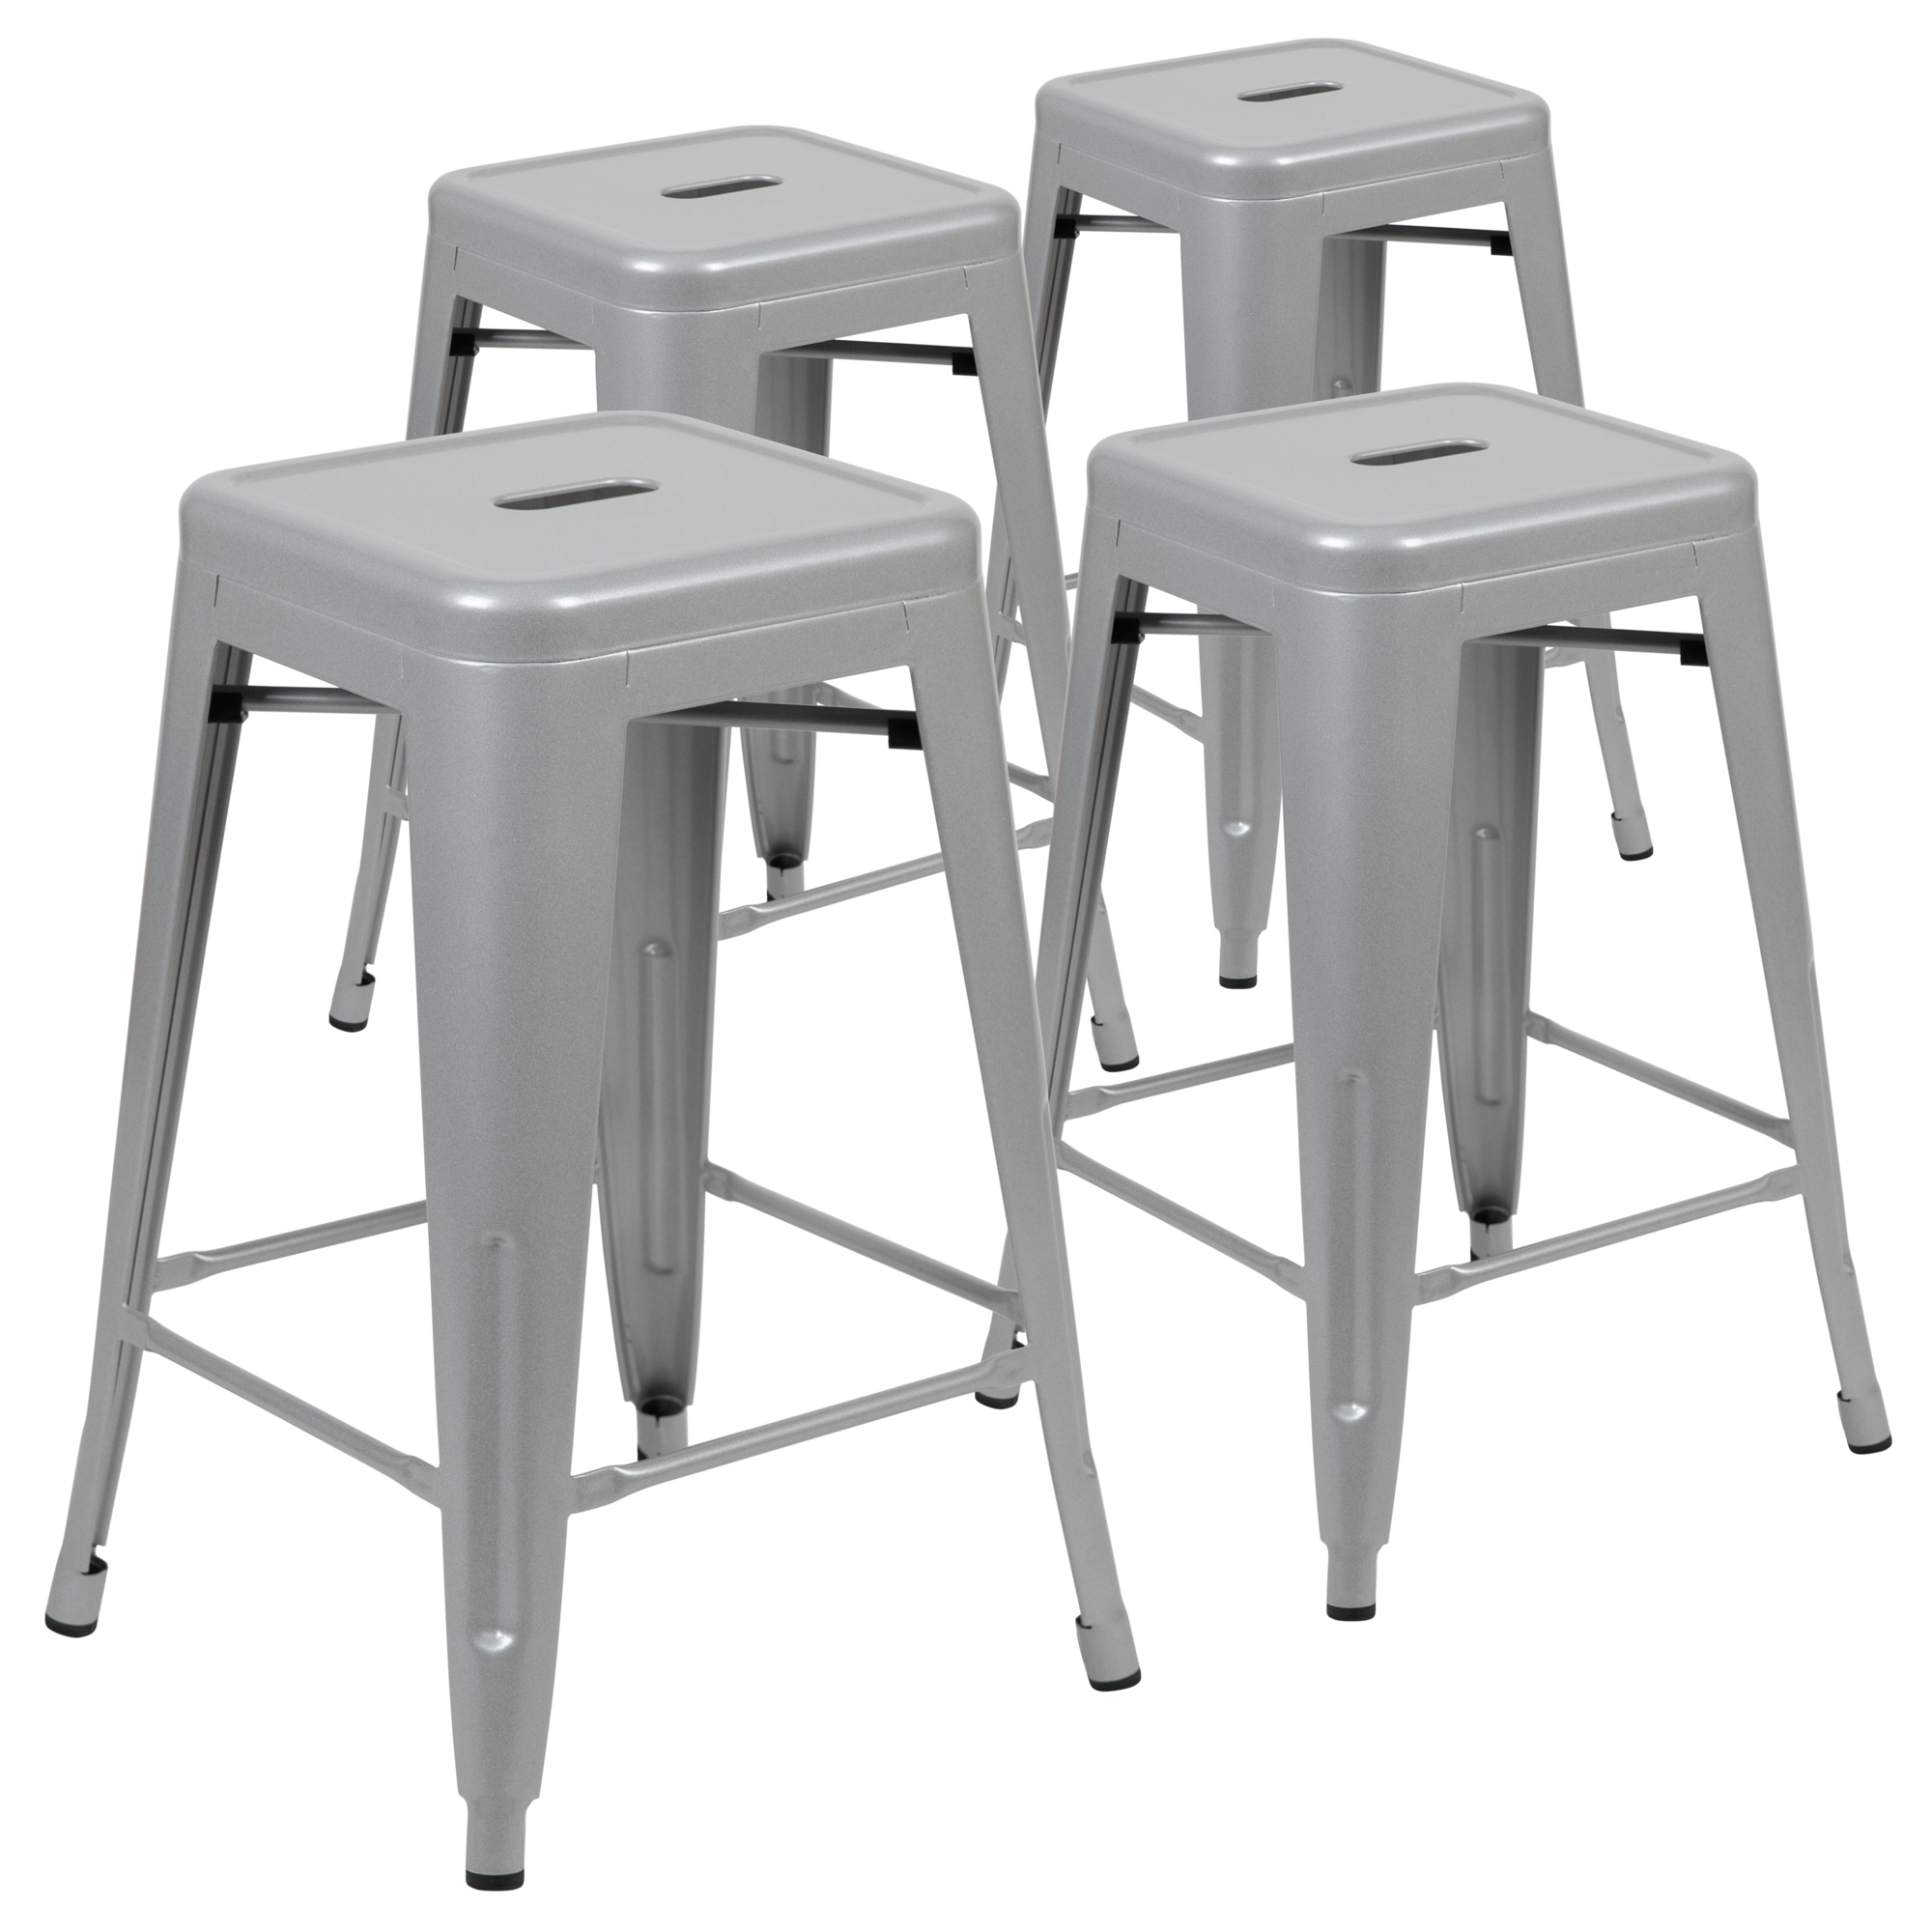 Flash Furniture, 4 Pack 24Inch High Metal Indoor Counter Stool, Silver, Primary Color Gray, Included (qty.) 4, Model 4ET3132024SVR